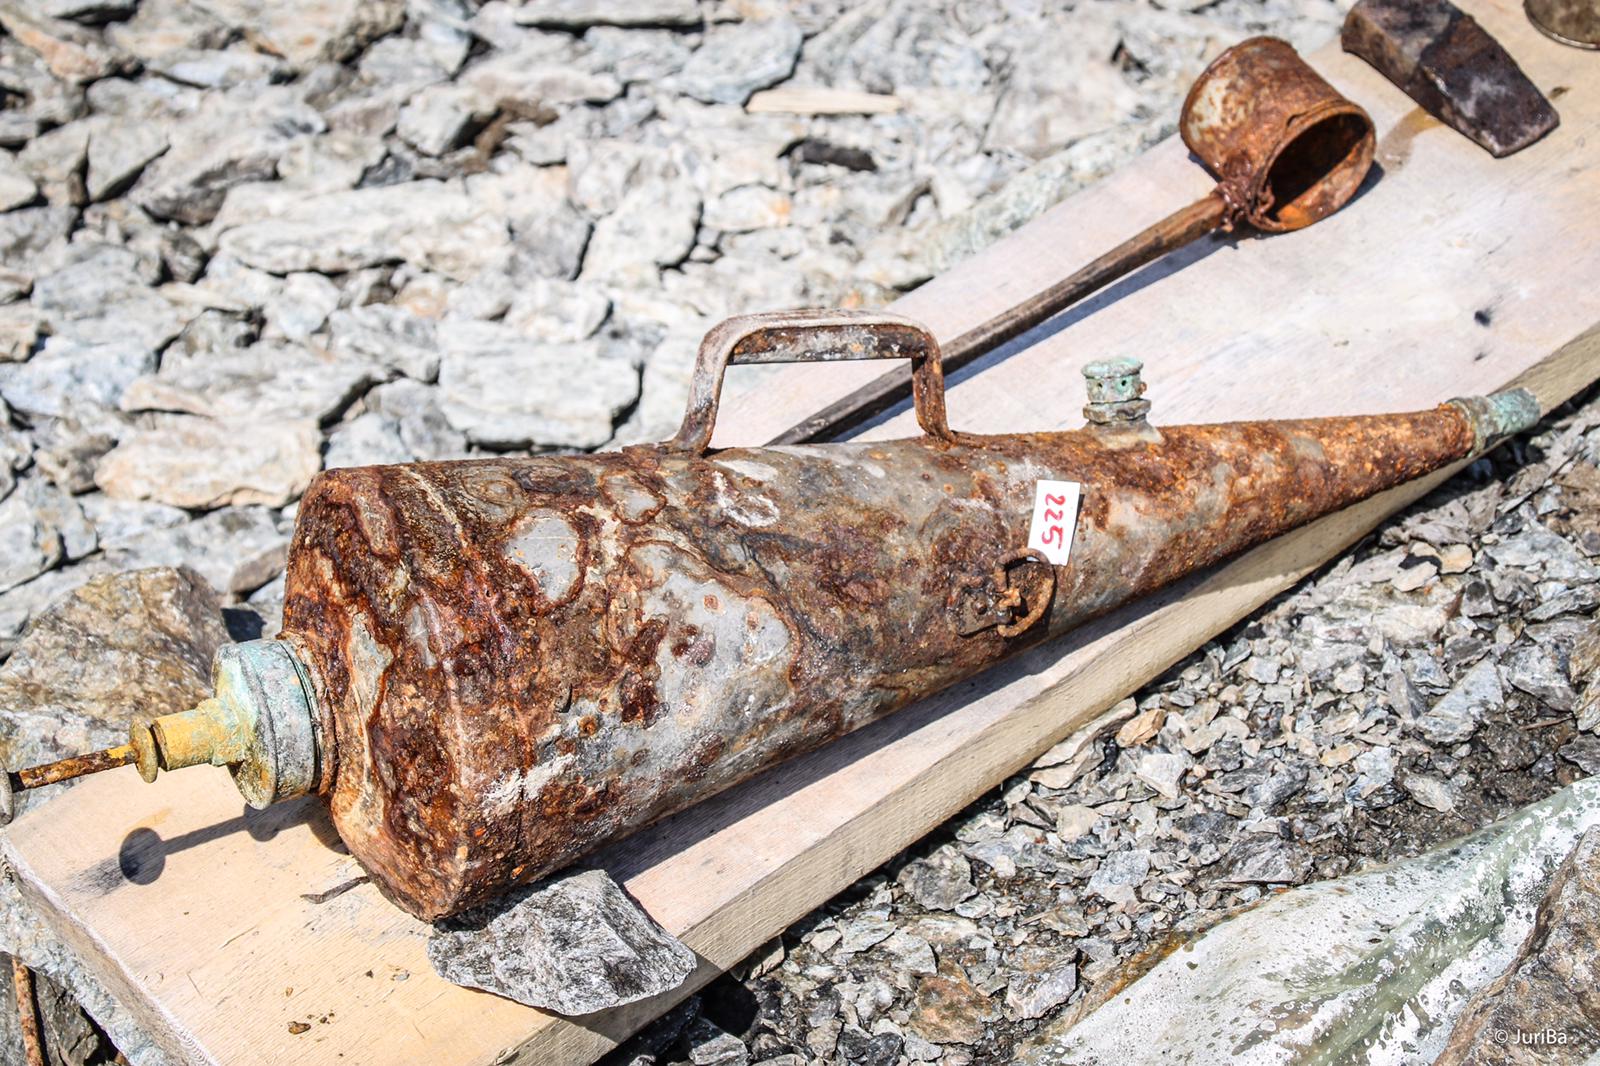 This World War I fire extinguisher was among the items found. (Photo: Stelvio National Park)